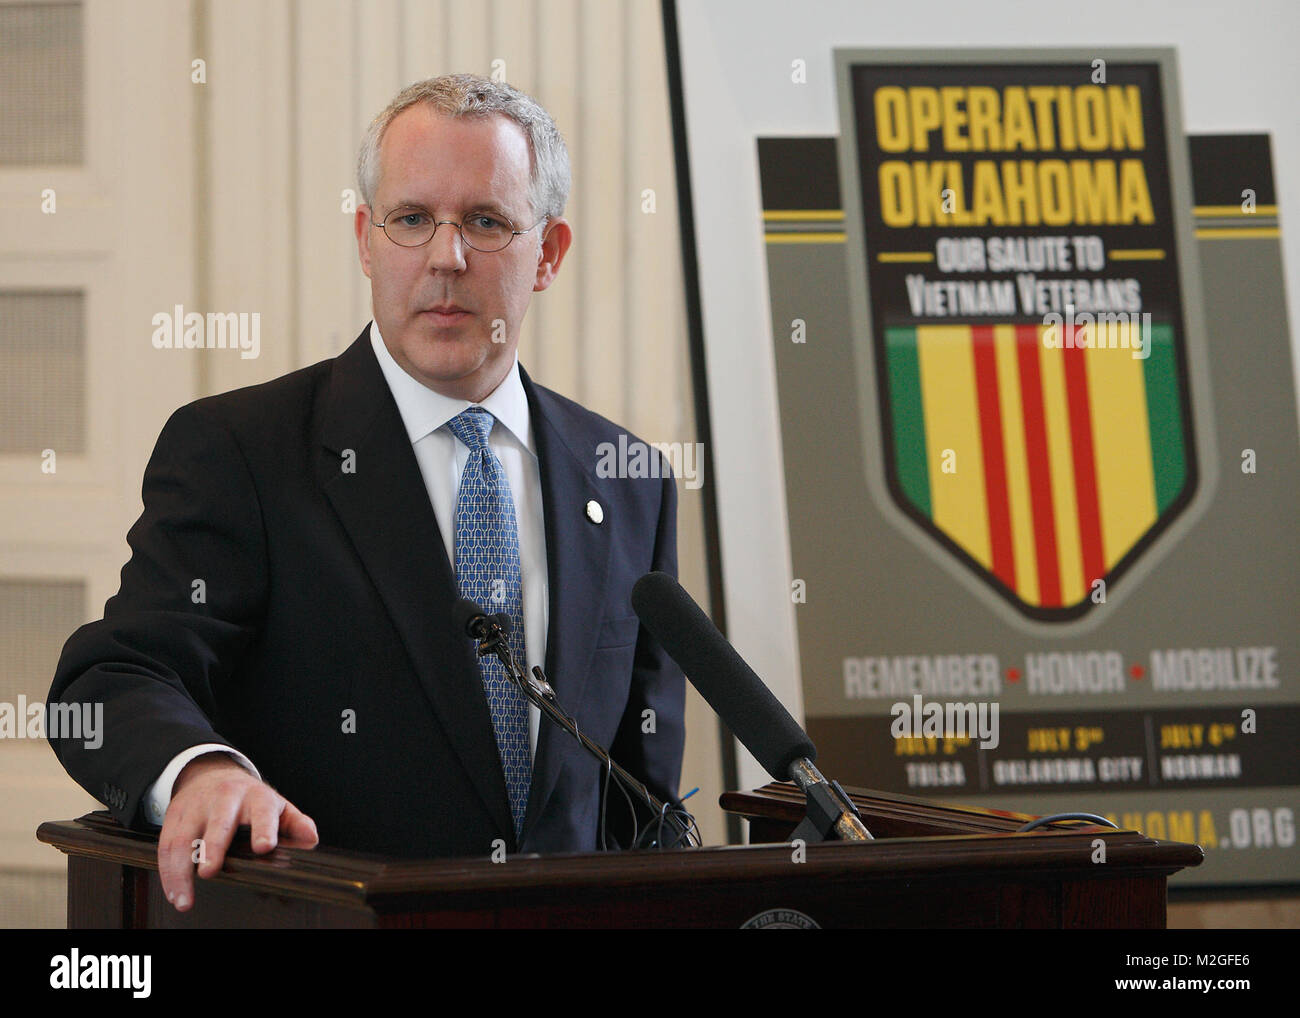 Oklahoma Governor Brad Henry delivers his comments on Operation